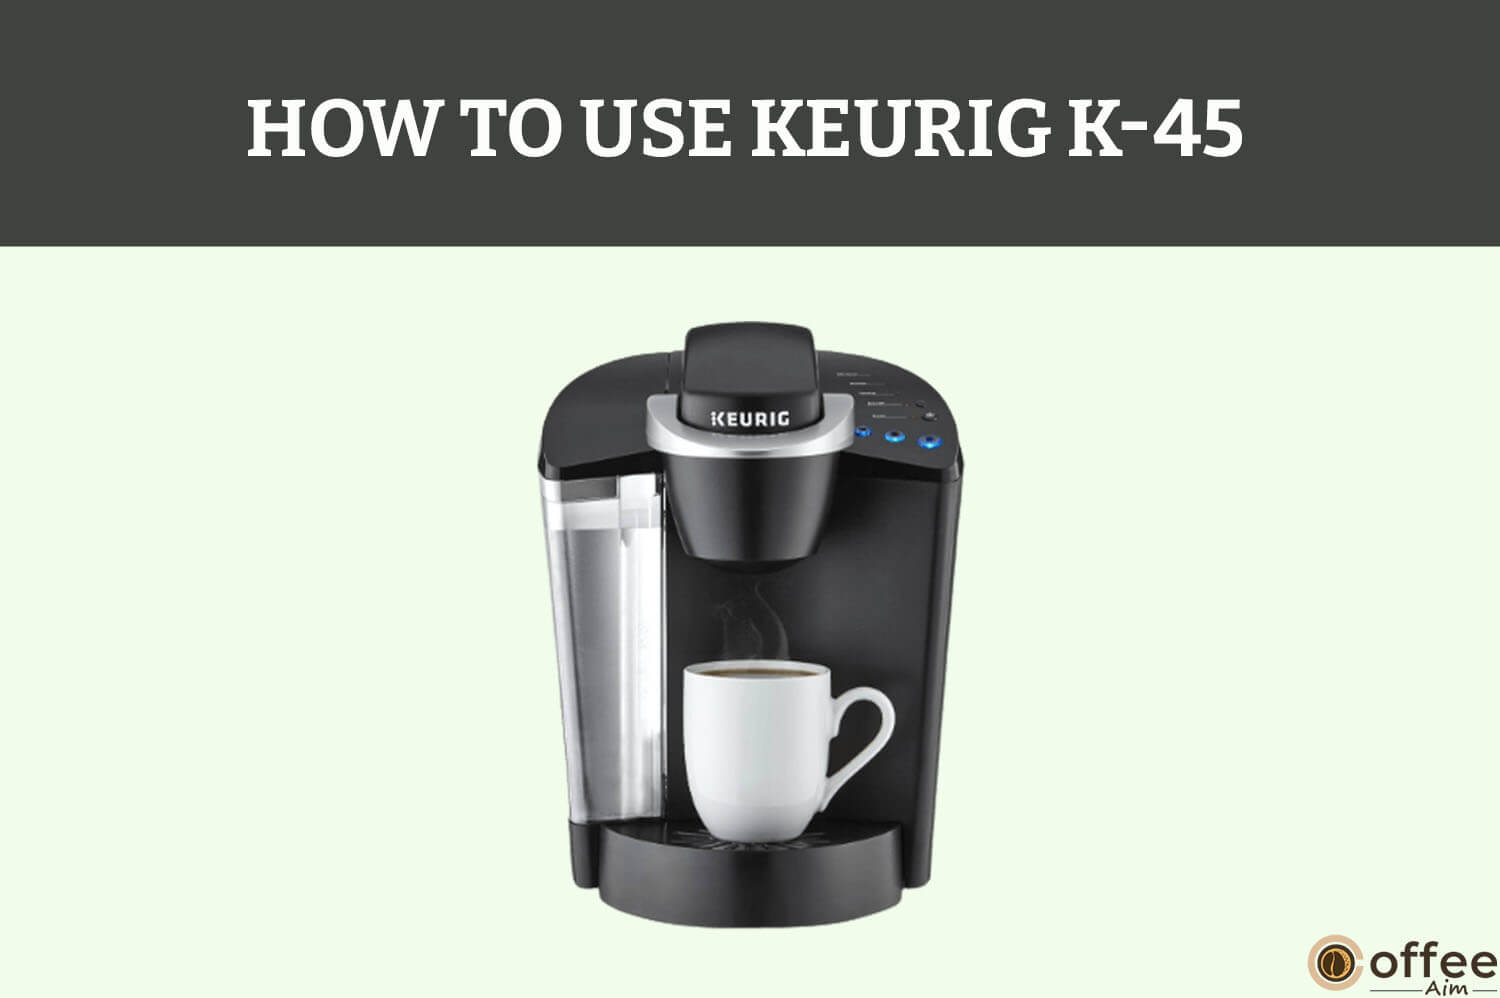 Featured image for the article "How To Use Keurig K-45"